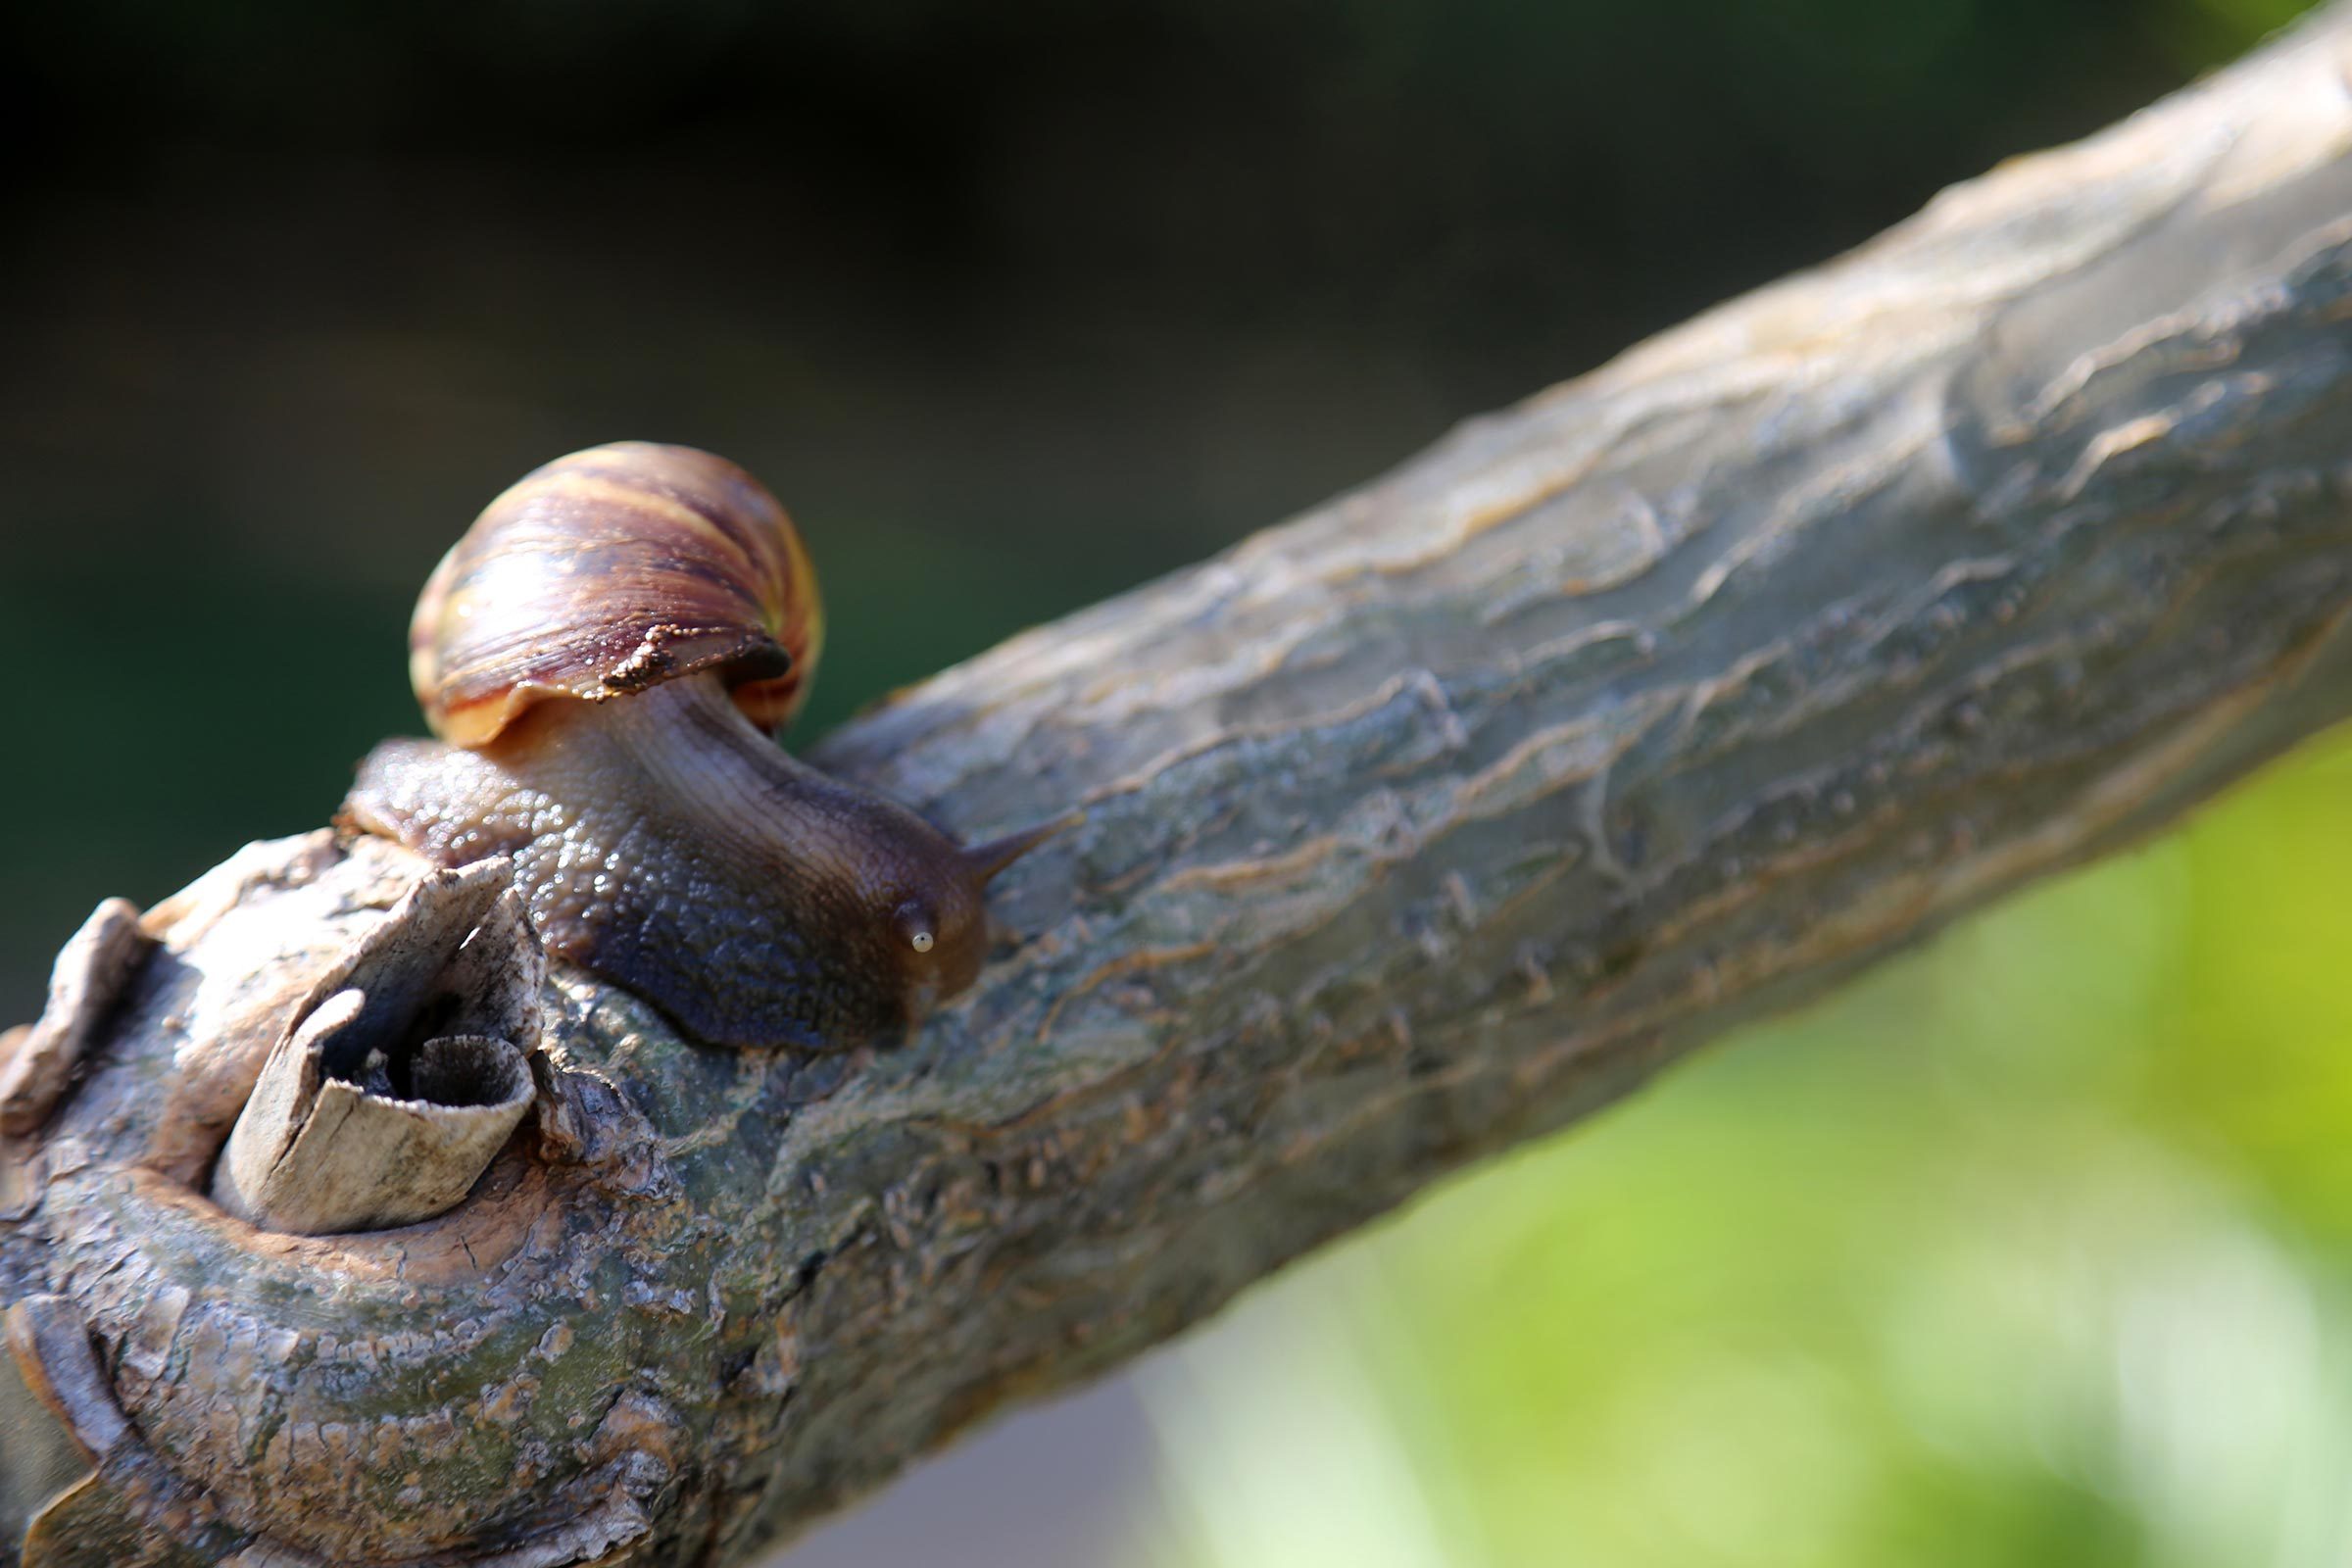 https://www.rd.com/wp-content/uploads/2018/10/o-ahu-tree-snail-oahu-tree-snails-form-a-large-genus-of-colorful-tropical-tree-living-air-breathing-land-snails-arboreal-pulmonate-gastropod-mollusks-in-the-family-achatinellidae.jpg